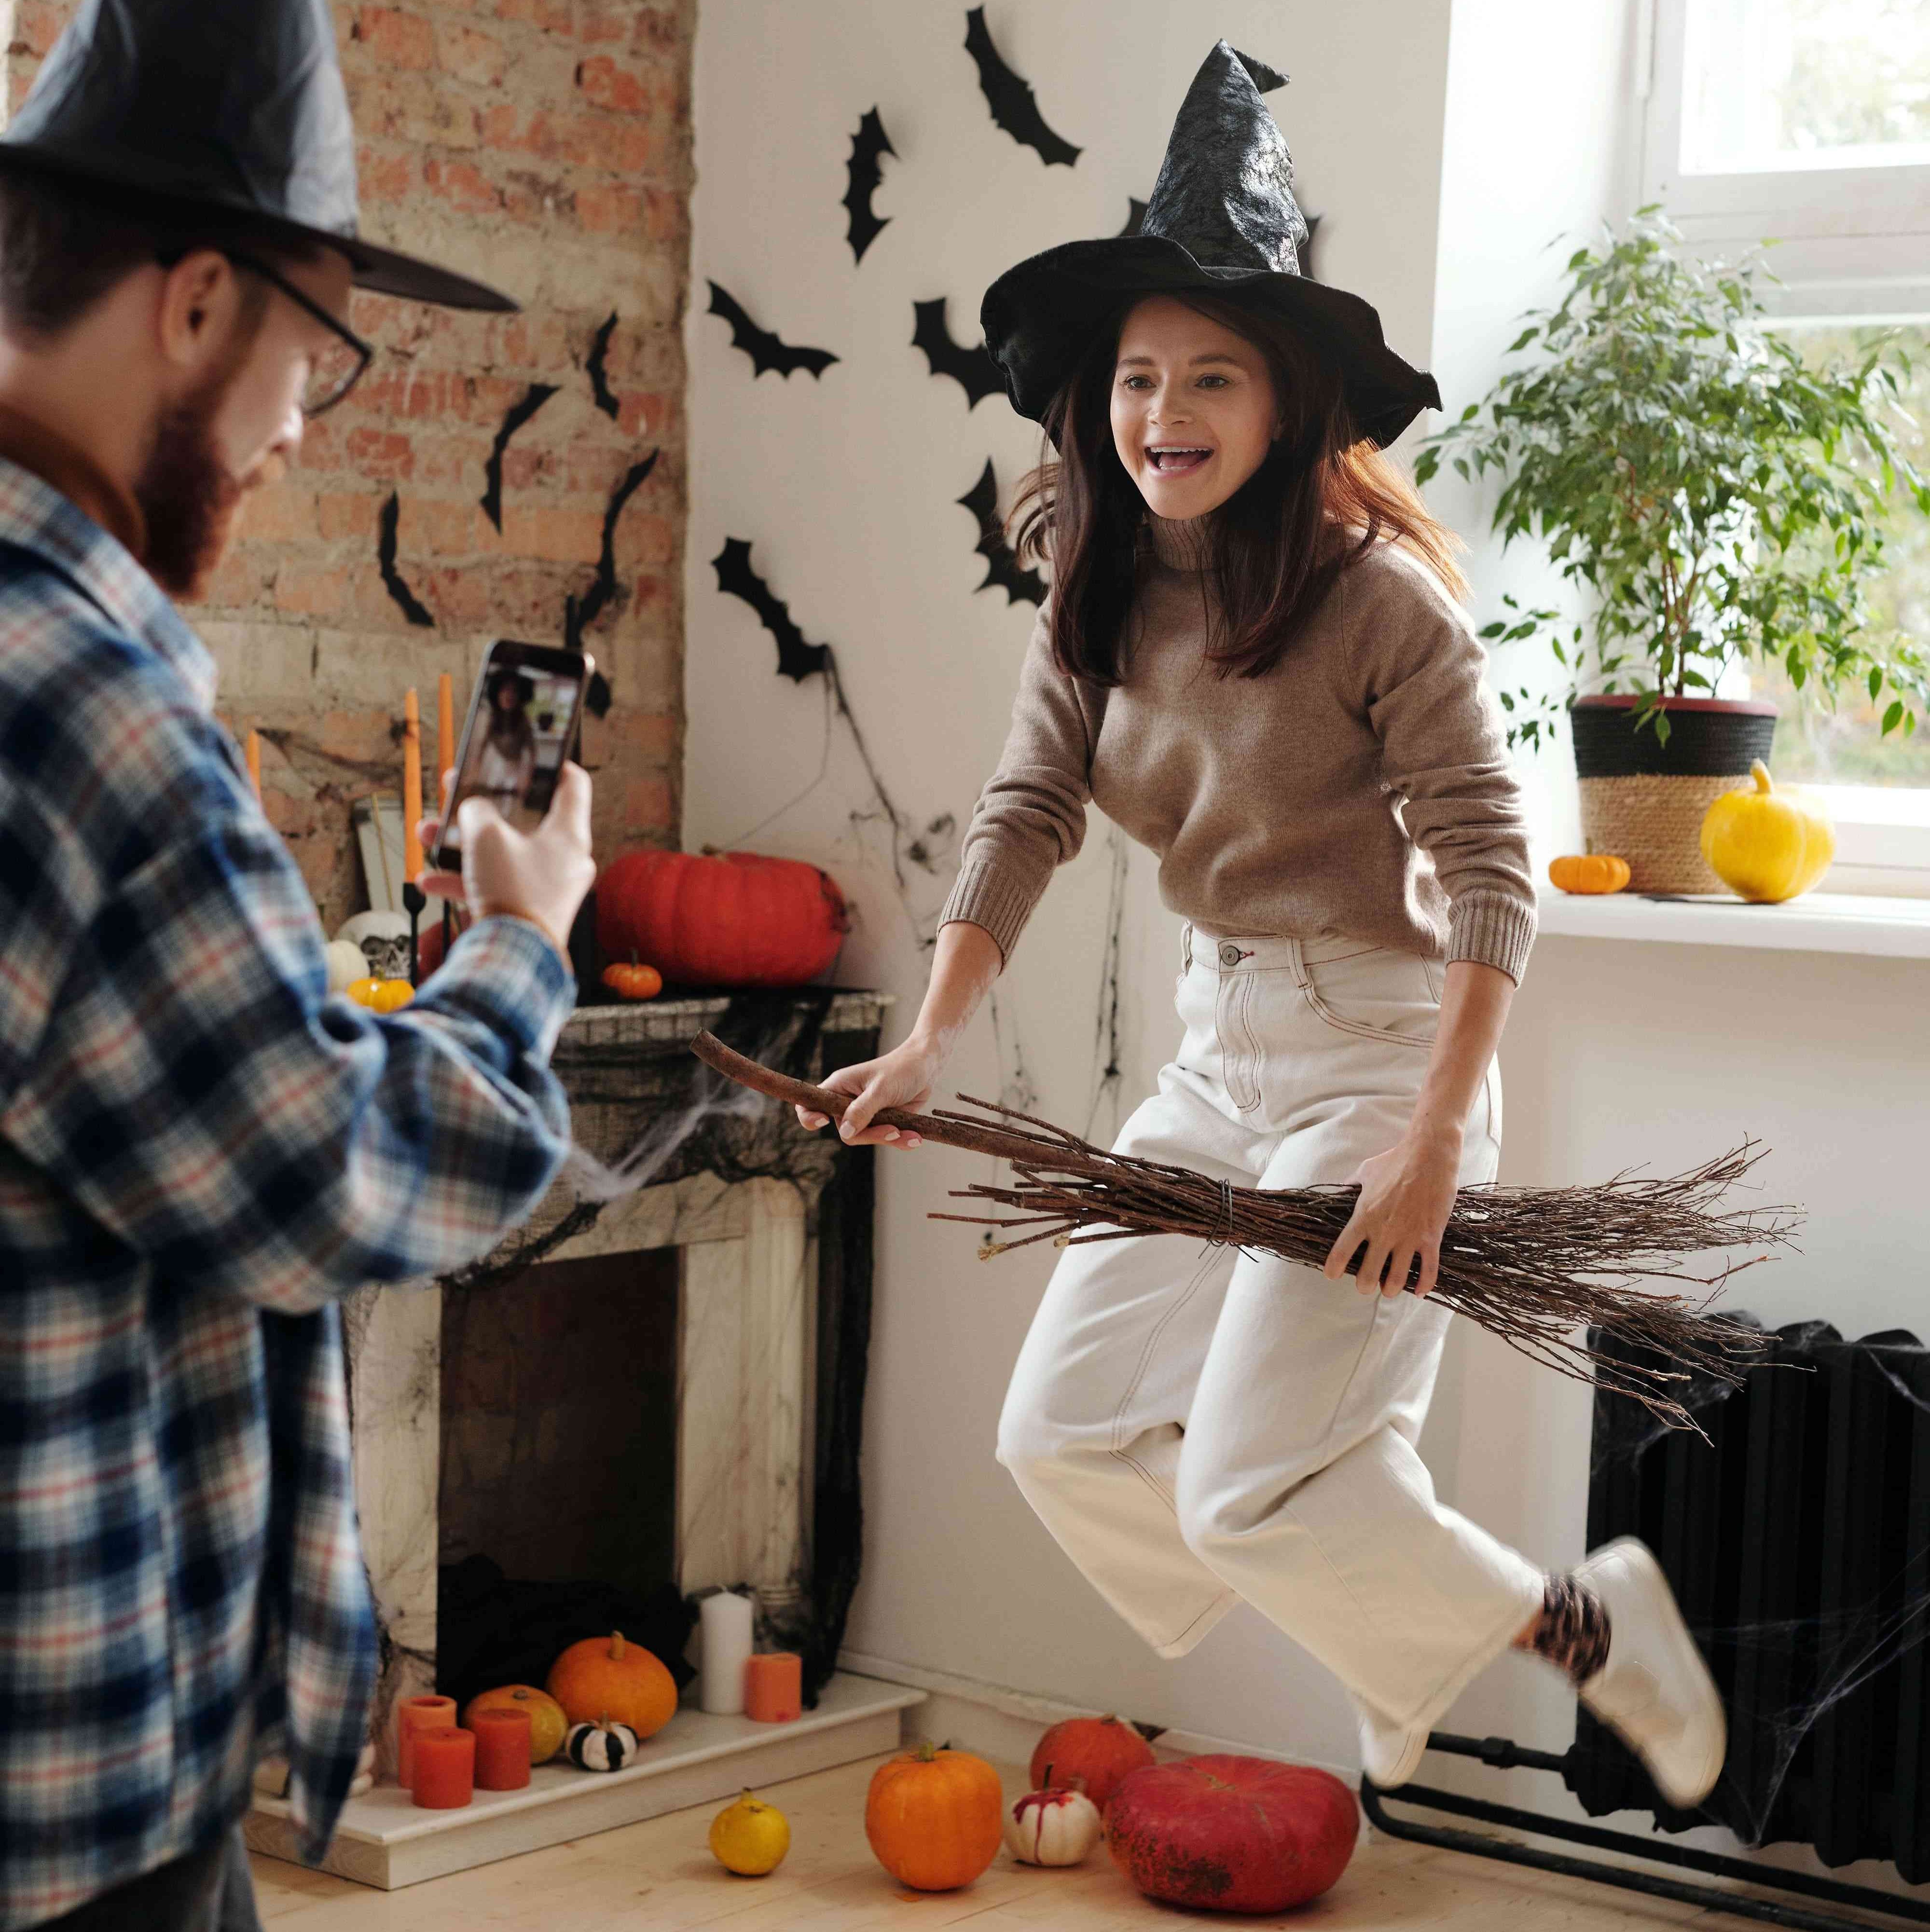 Person taking picture of another person on a broom next to Halloween decorated wall